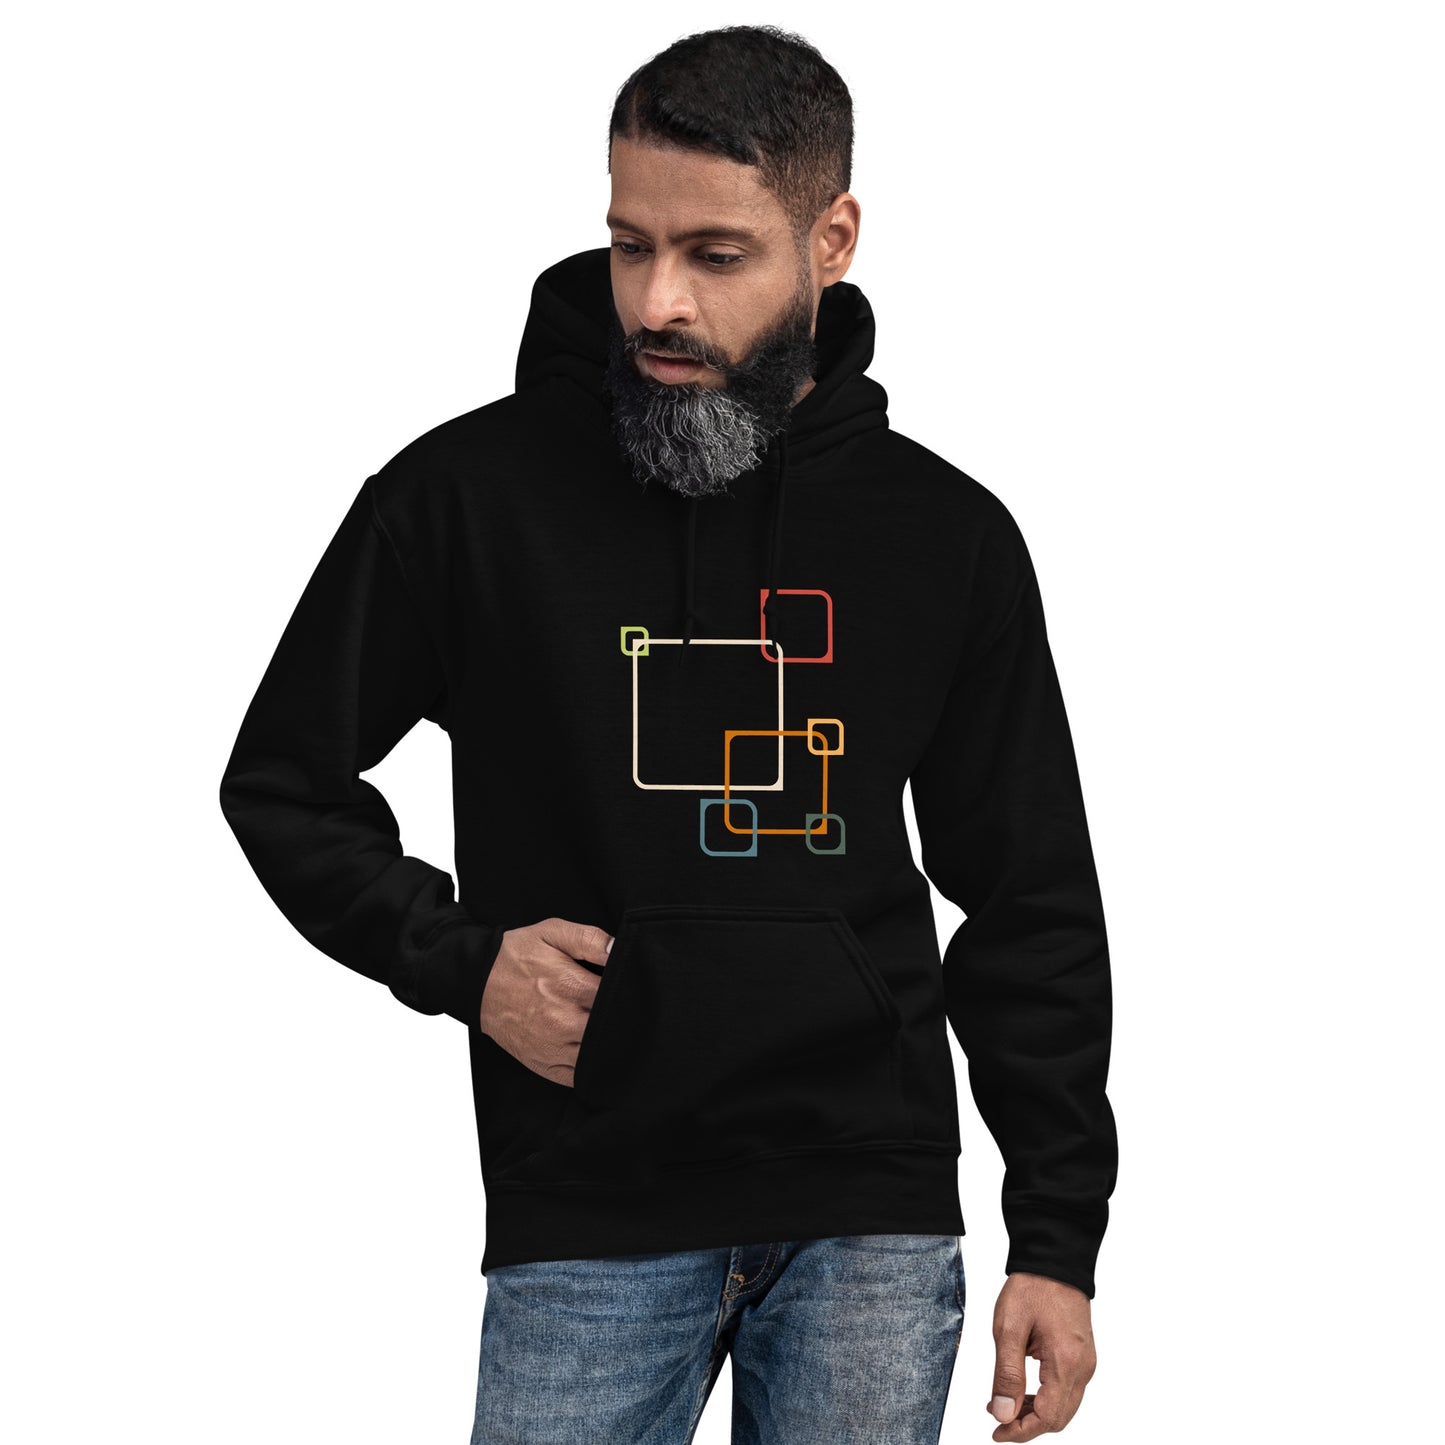 Shape, Square, Colors, Color, Random, Abstract, Organization, Perspective, Hoodie, Unisex